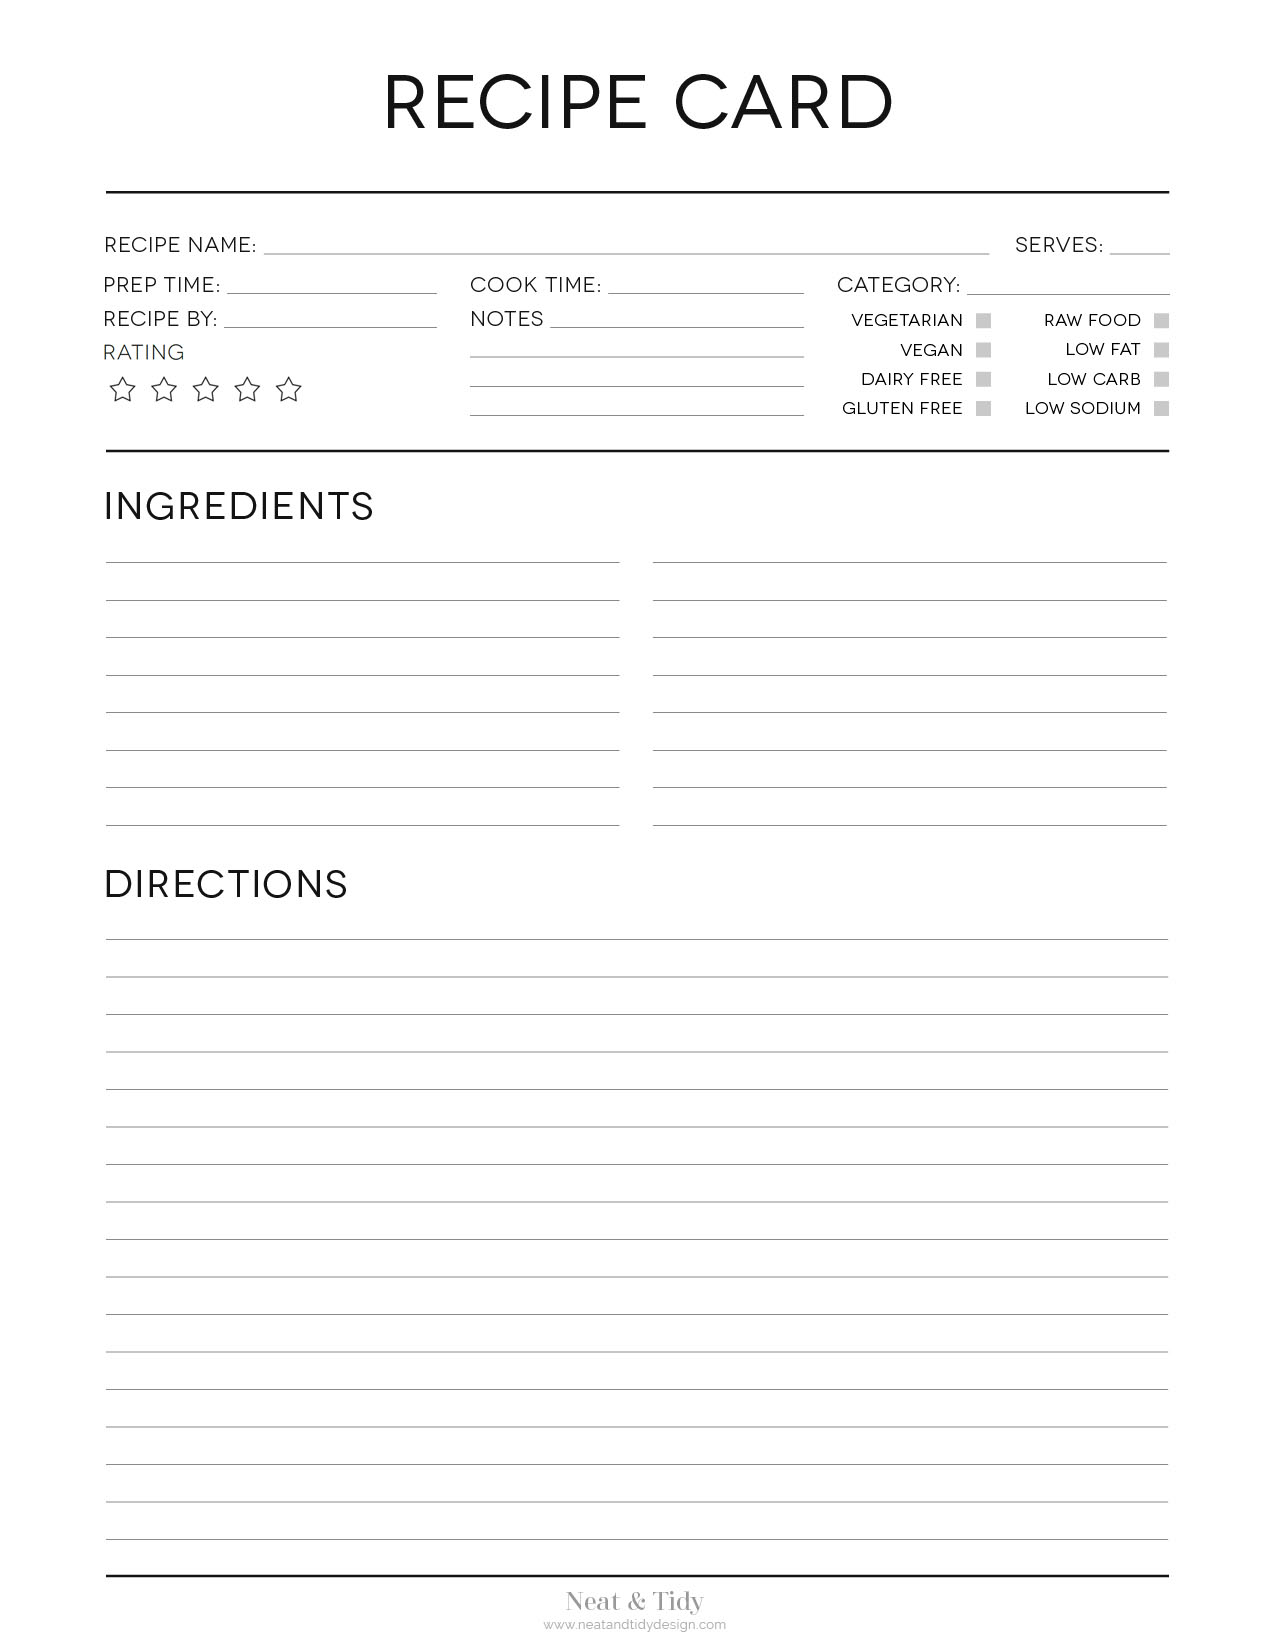 Recipe Card v21 - Black & White Pertaining To Fillable Recipe Card Template